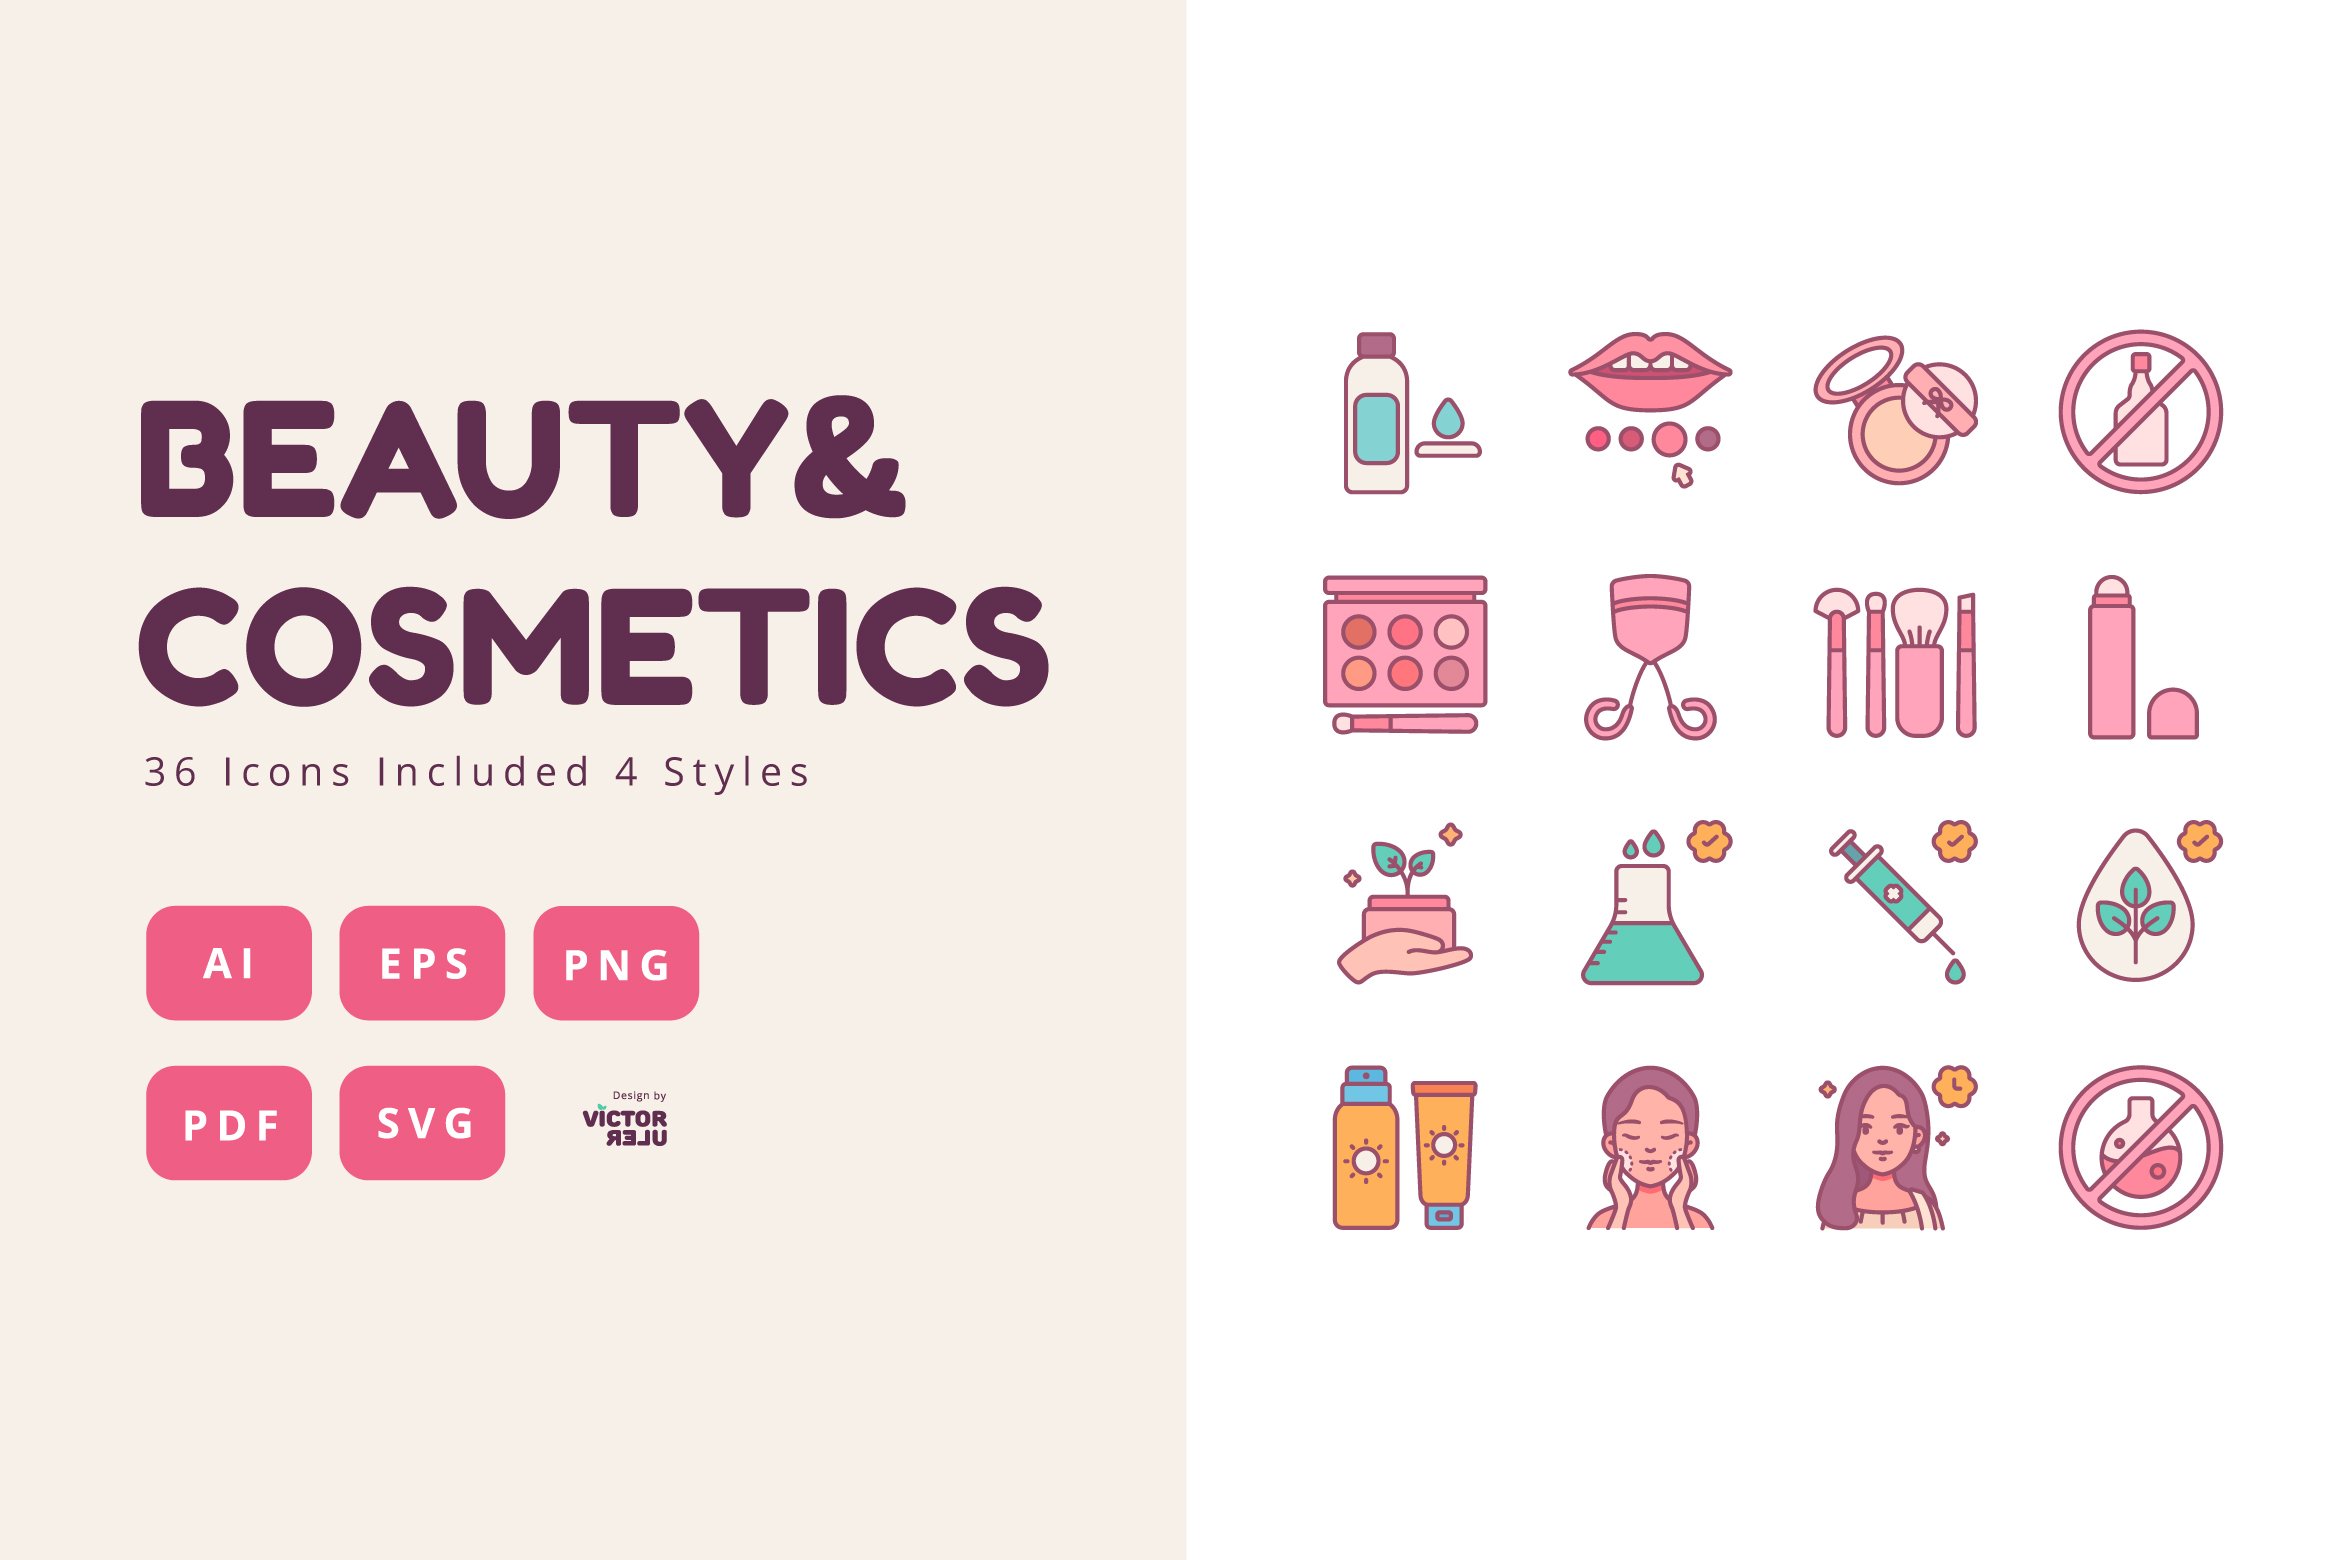 36 Icons - Beauty&Cosmetics cover image.